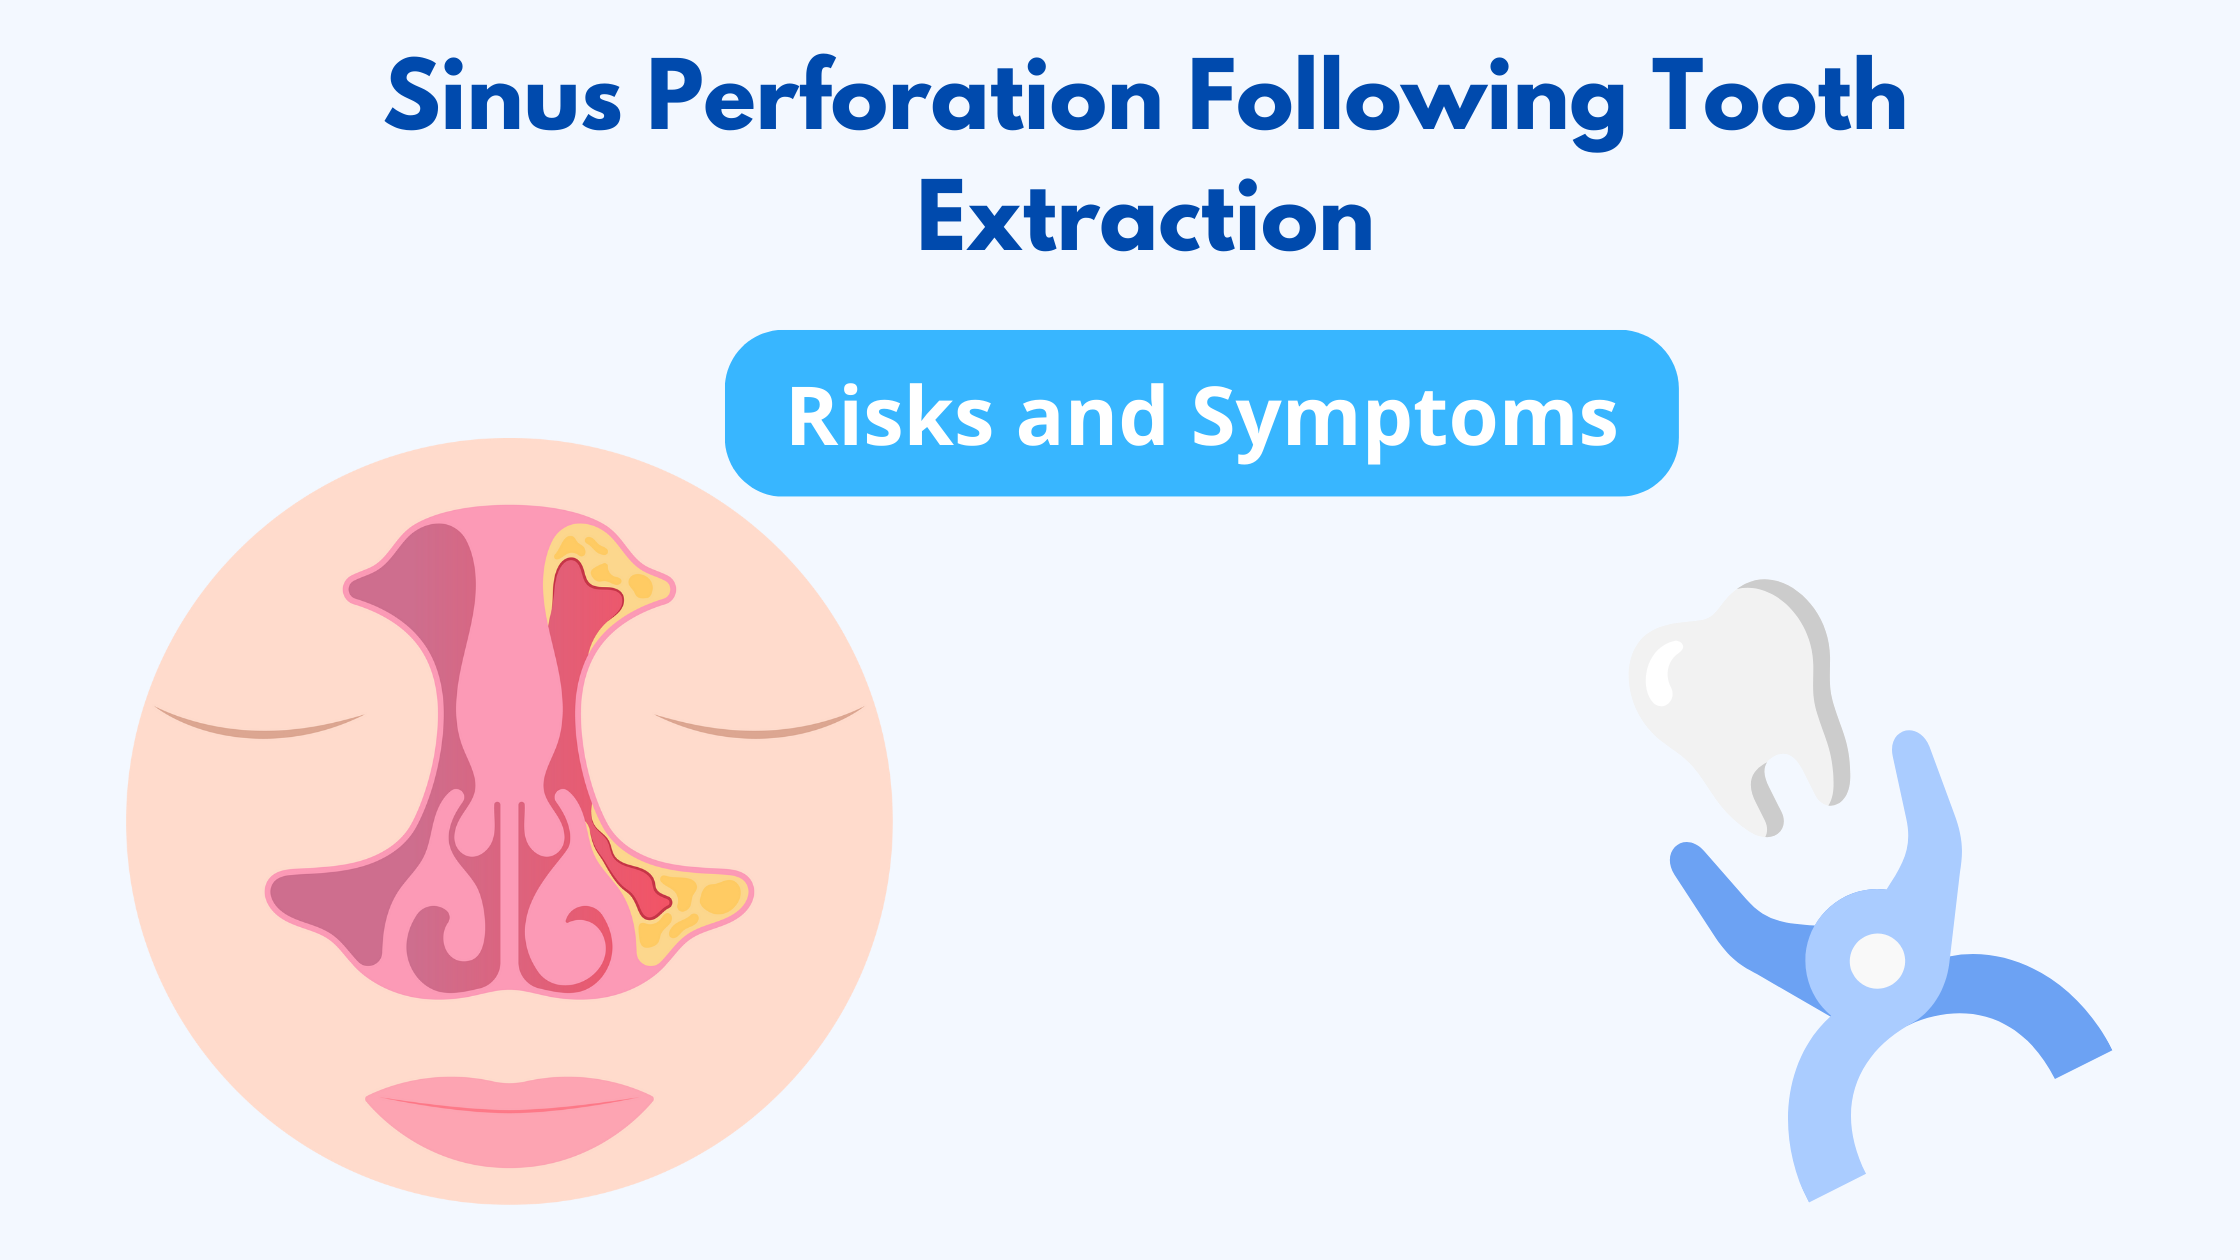 Sinus perforation after tooth extraction: Symptoms and Risk